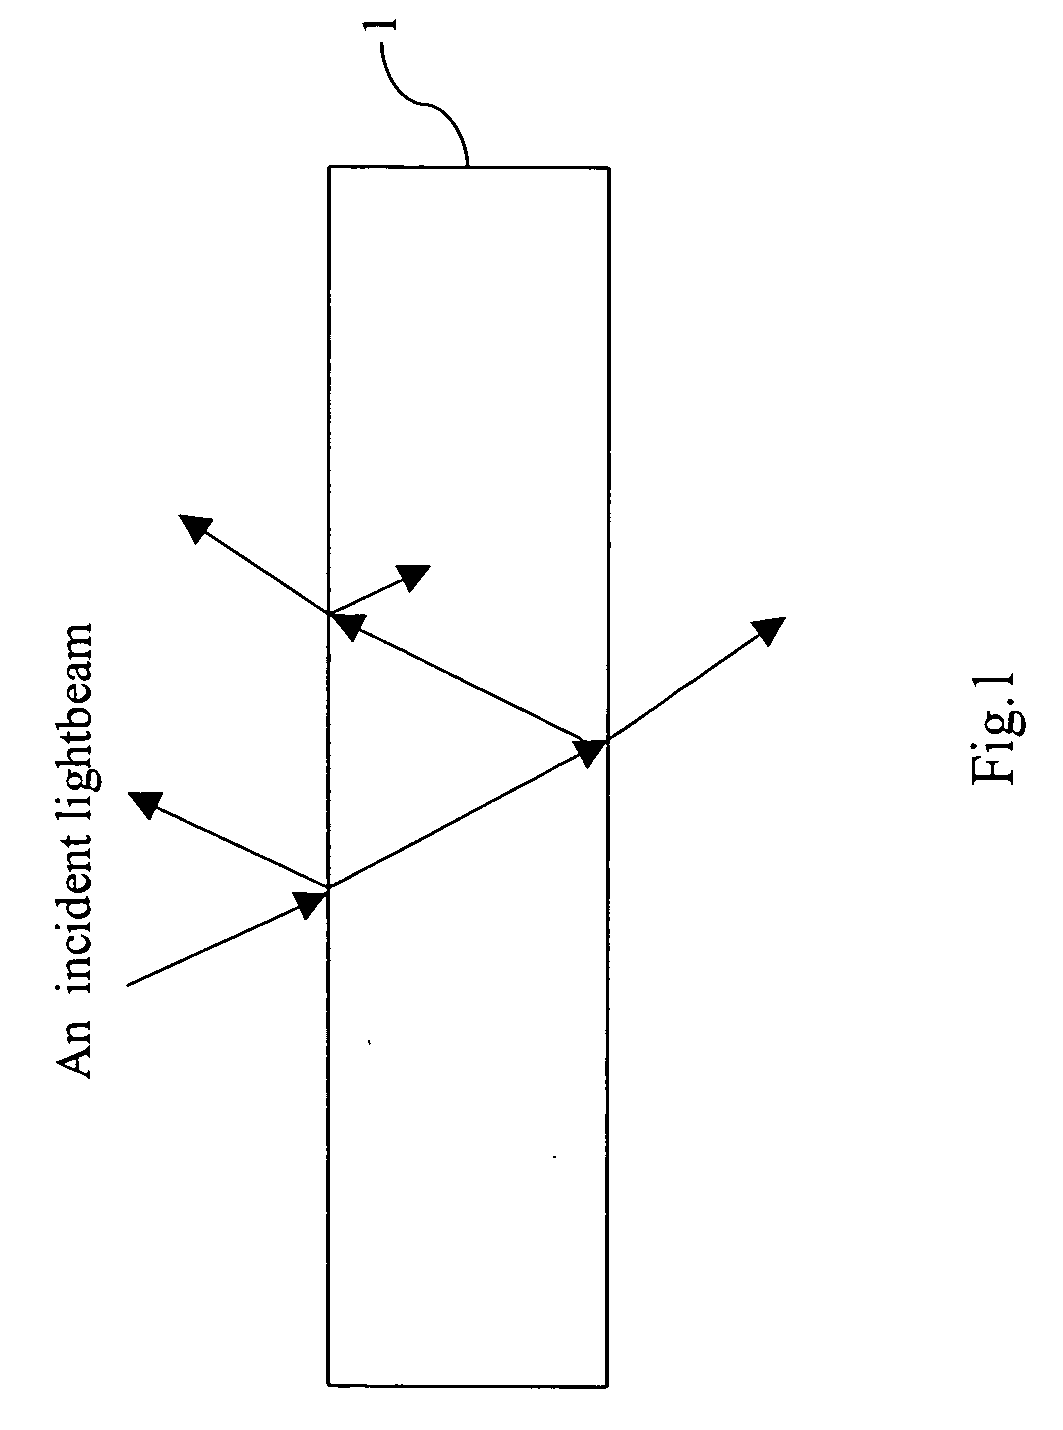 Optical method to monitor nano thin-film surface structure and thickness thereof